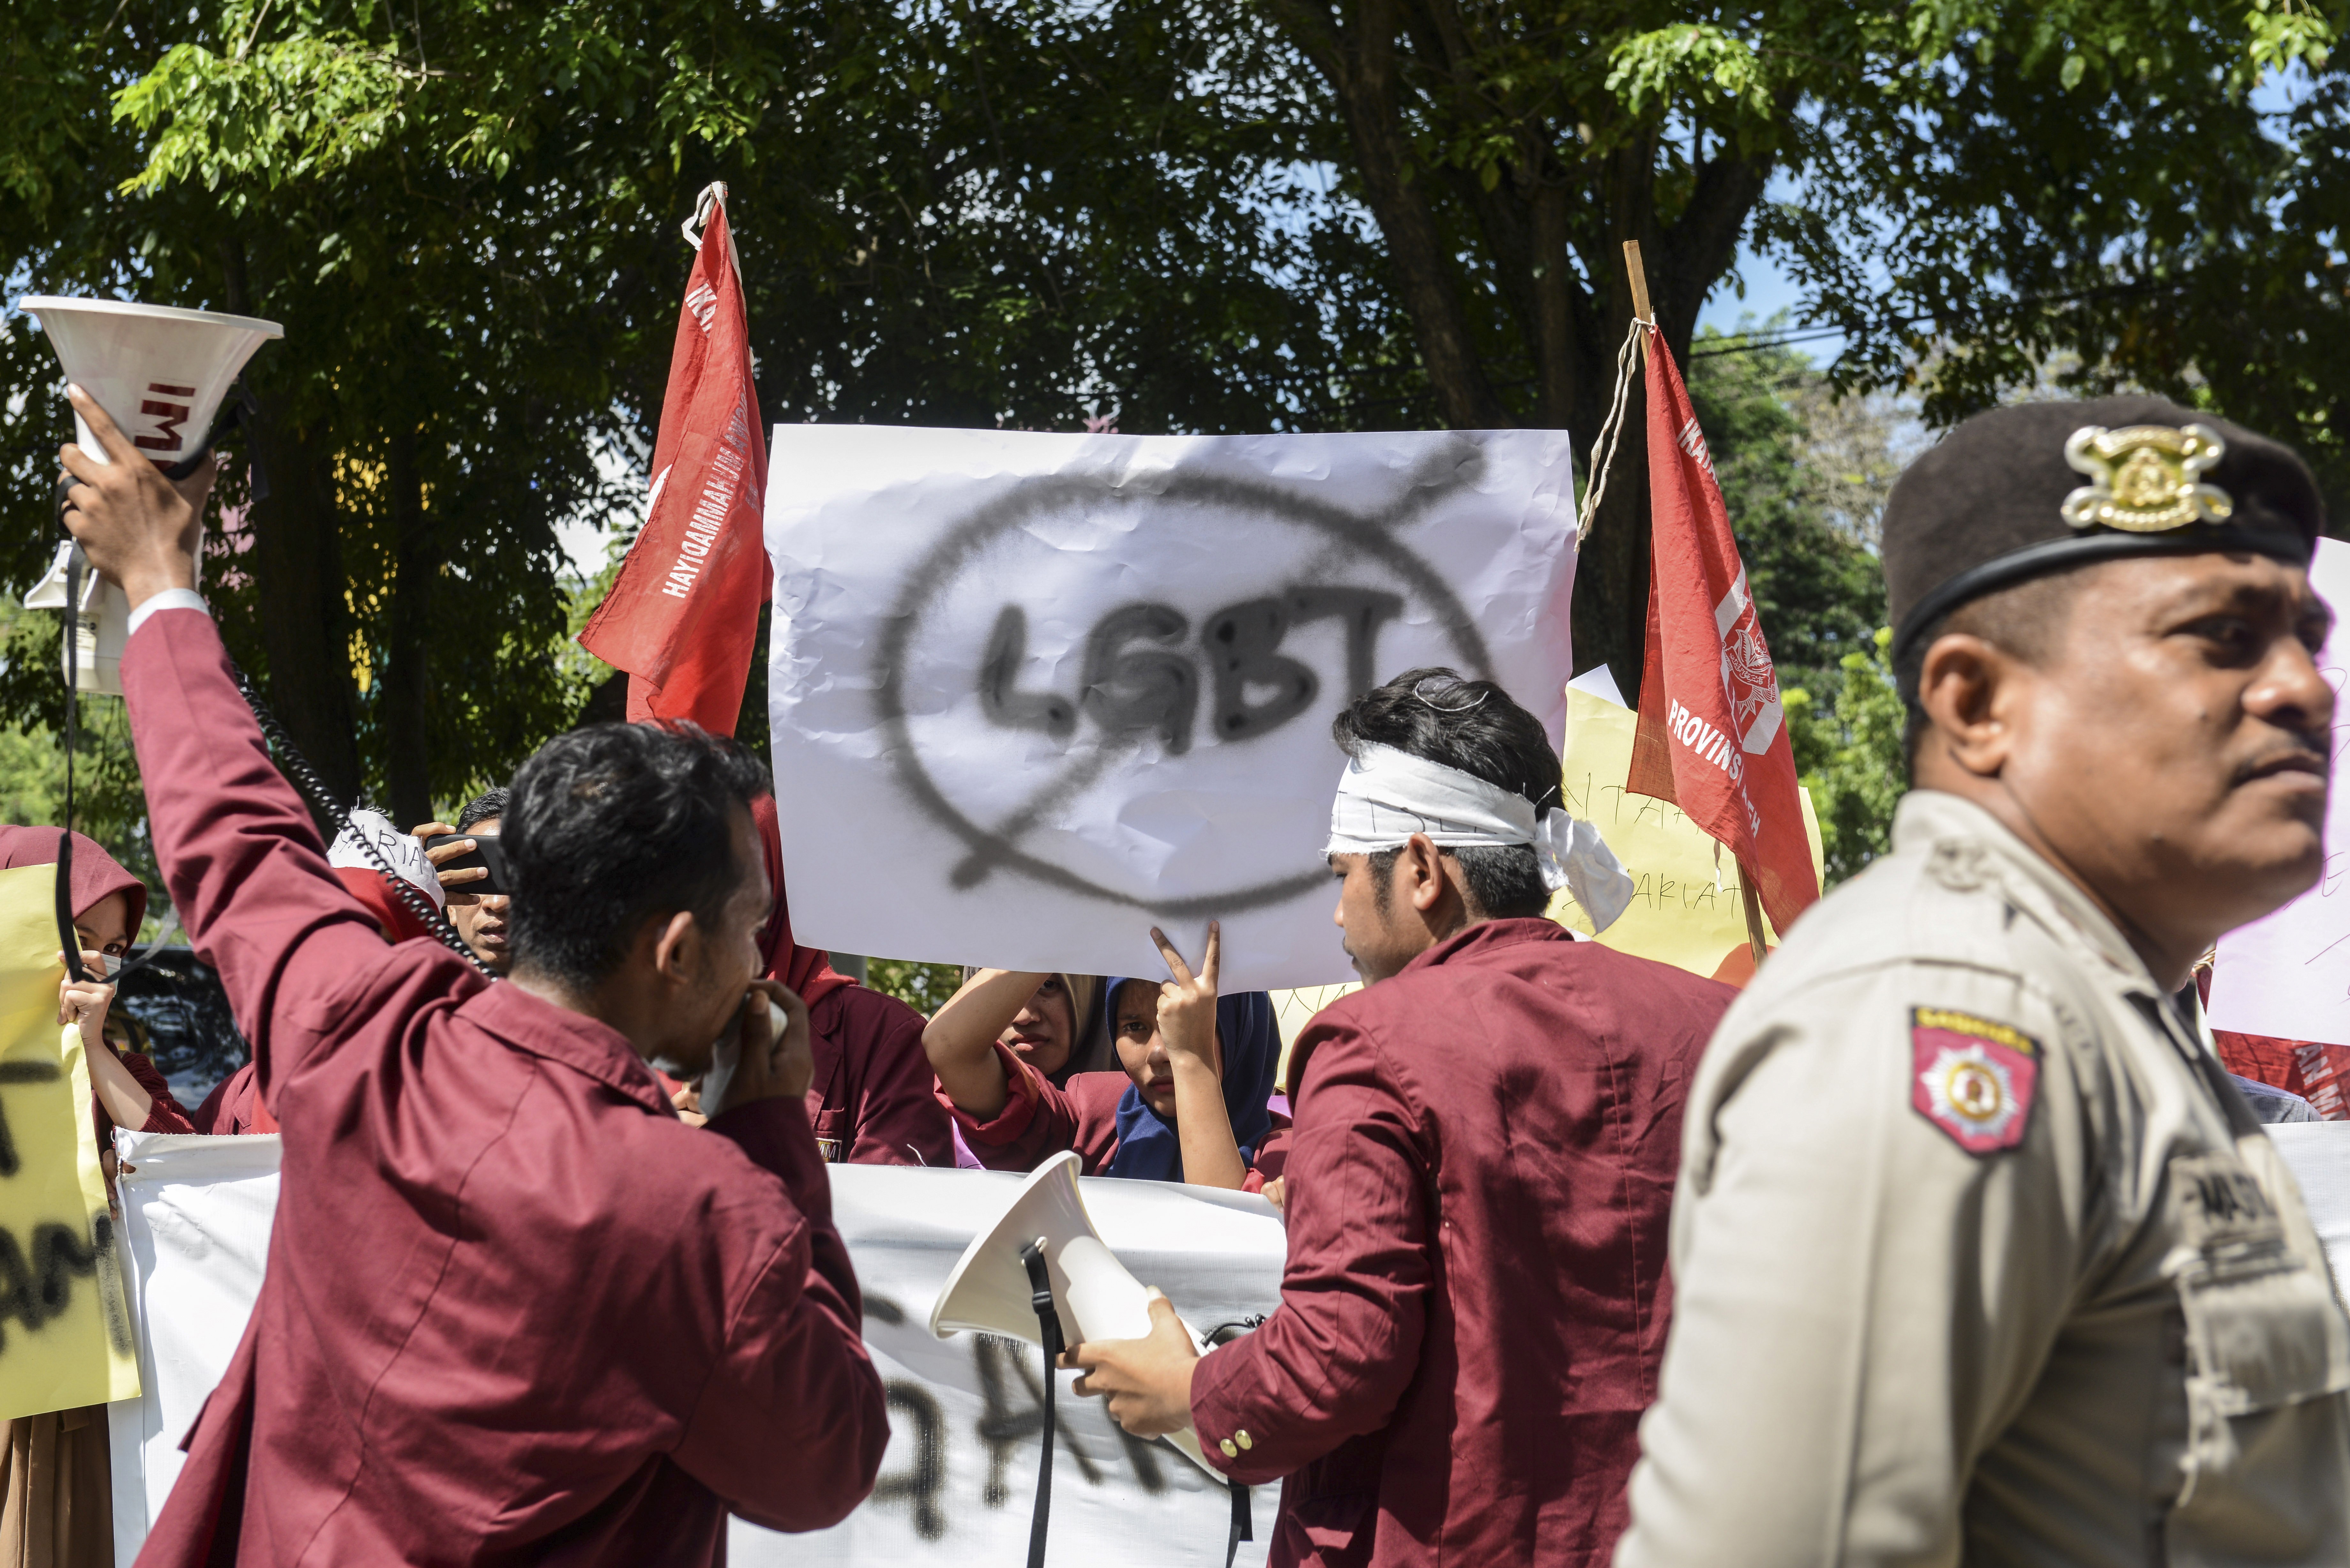 A group of Muslim protesters march with banners against the lesbian, gay, bisexual and transgender community in Banda Aceh in 2017. Photo: AFP